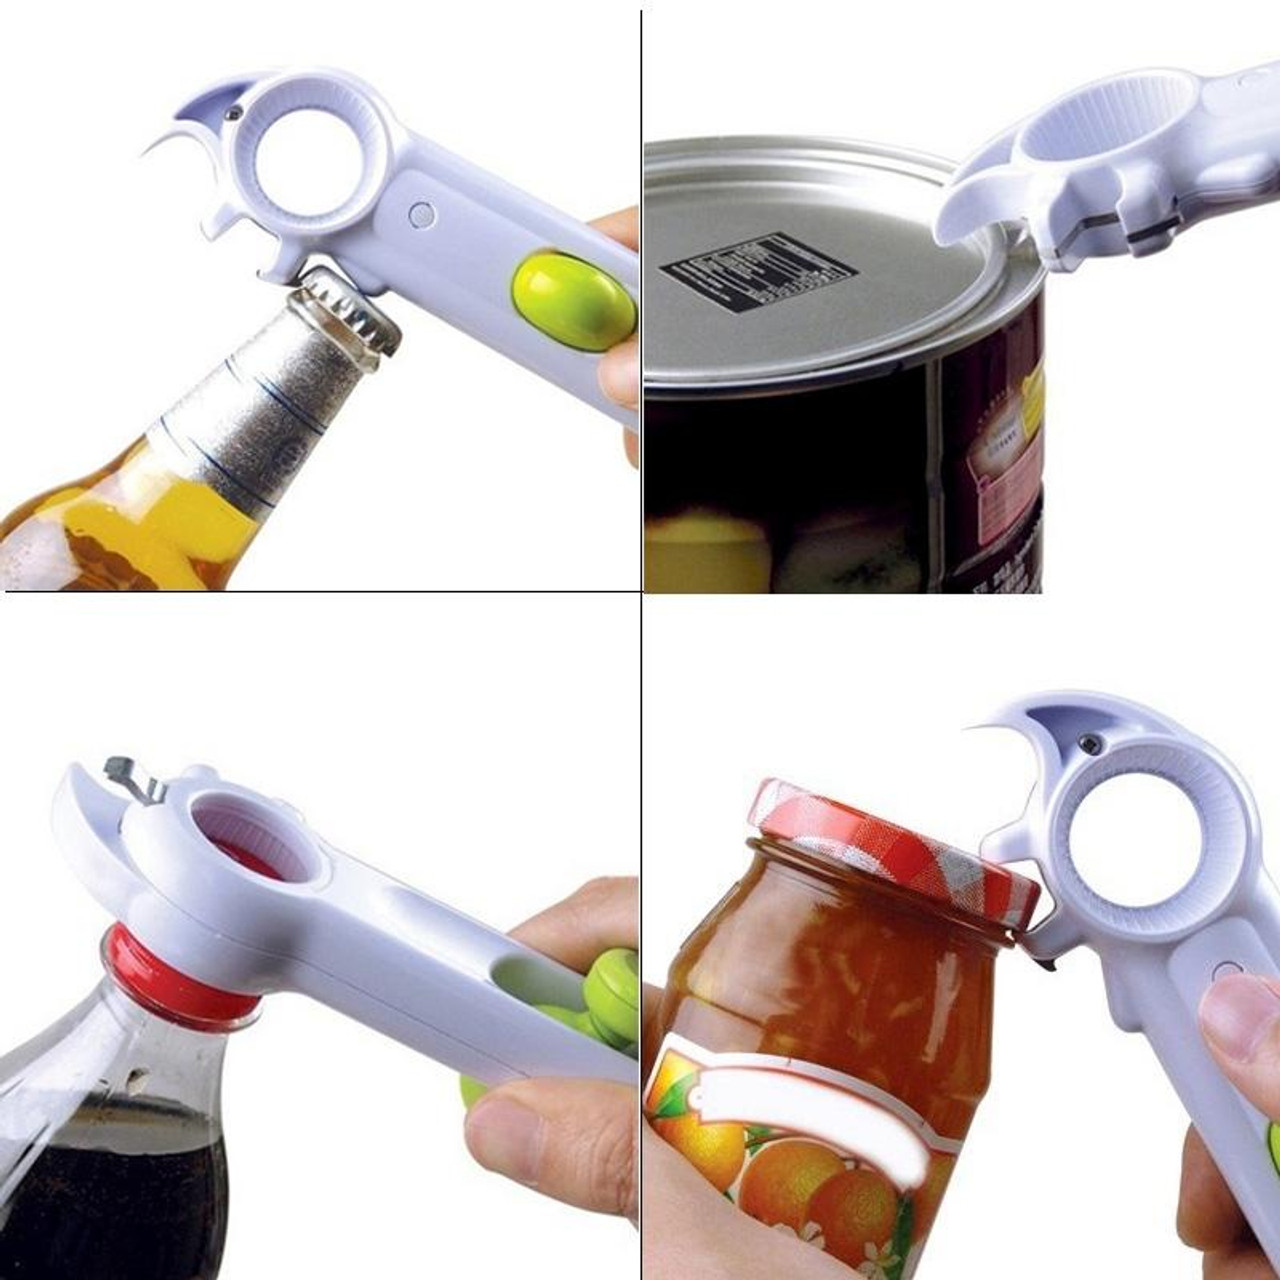 1pc Cute & Creative Stainless Steel Bottle Opener With Decorative Sticker  (diy)